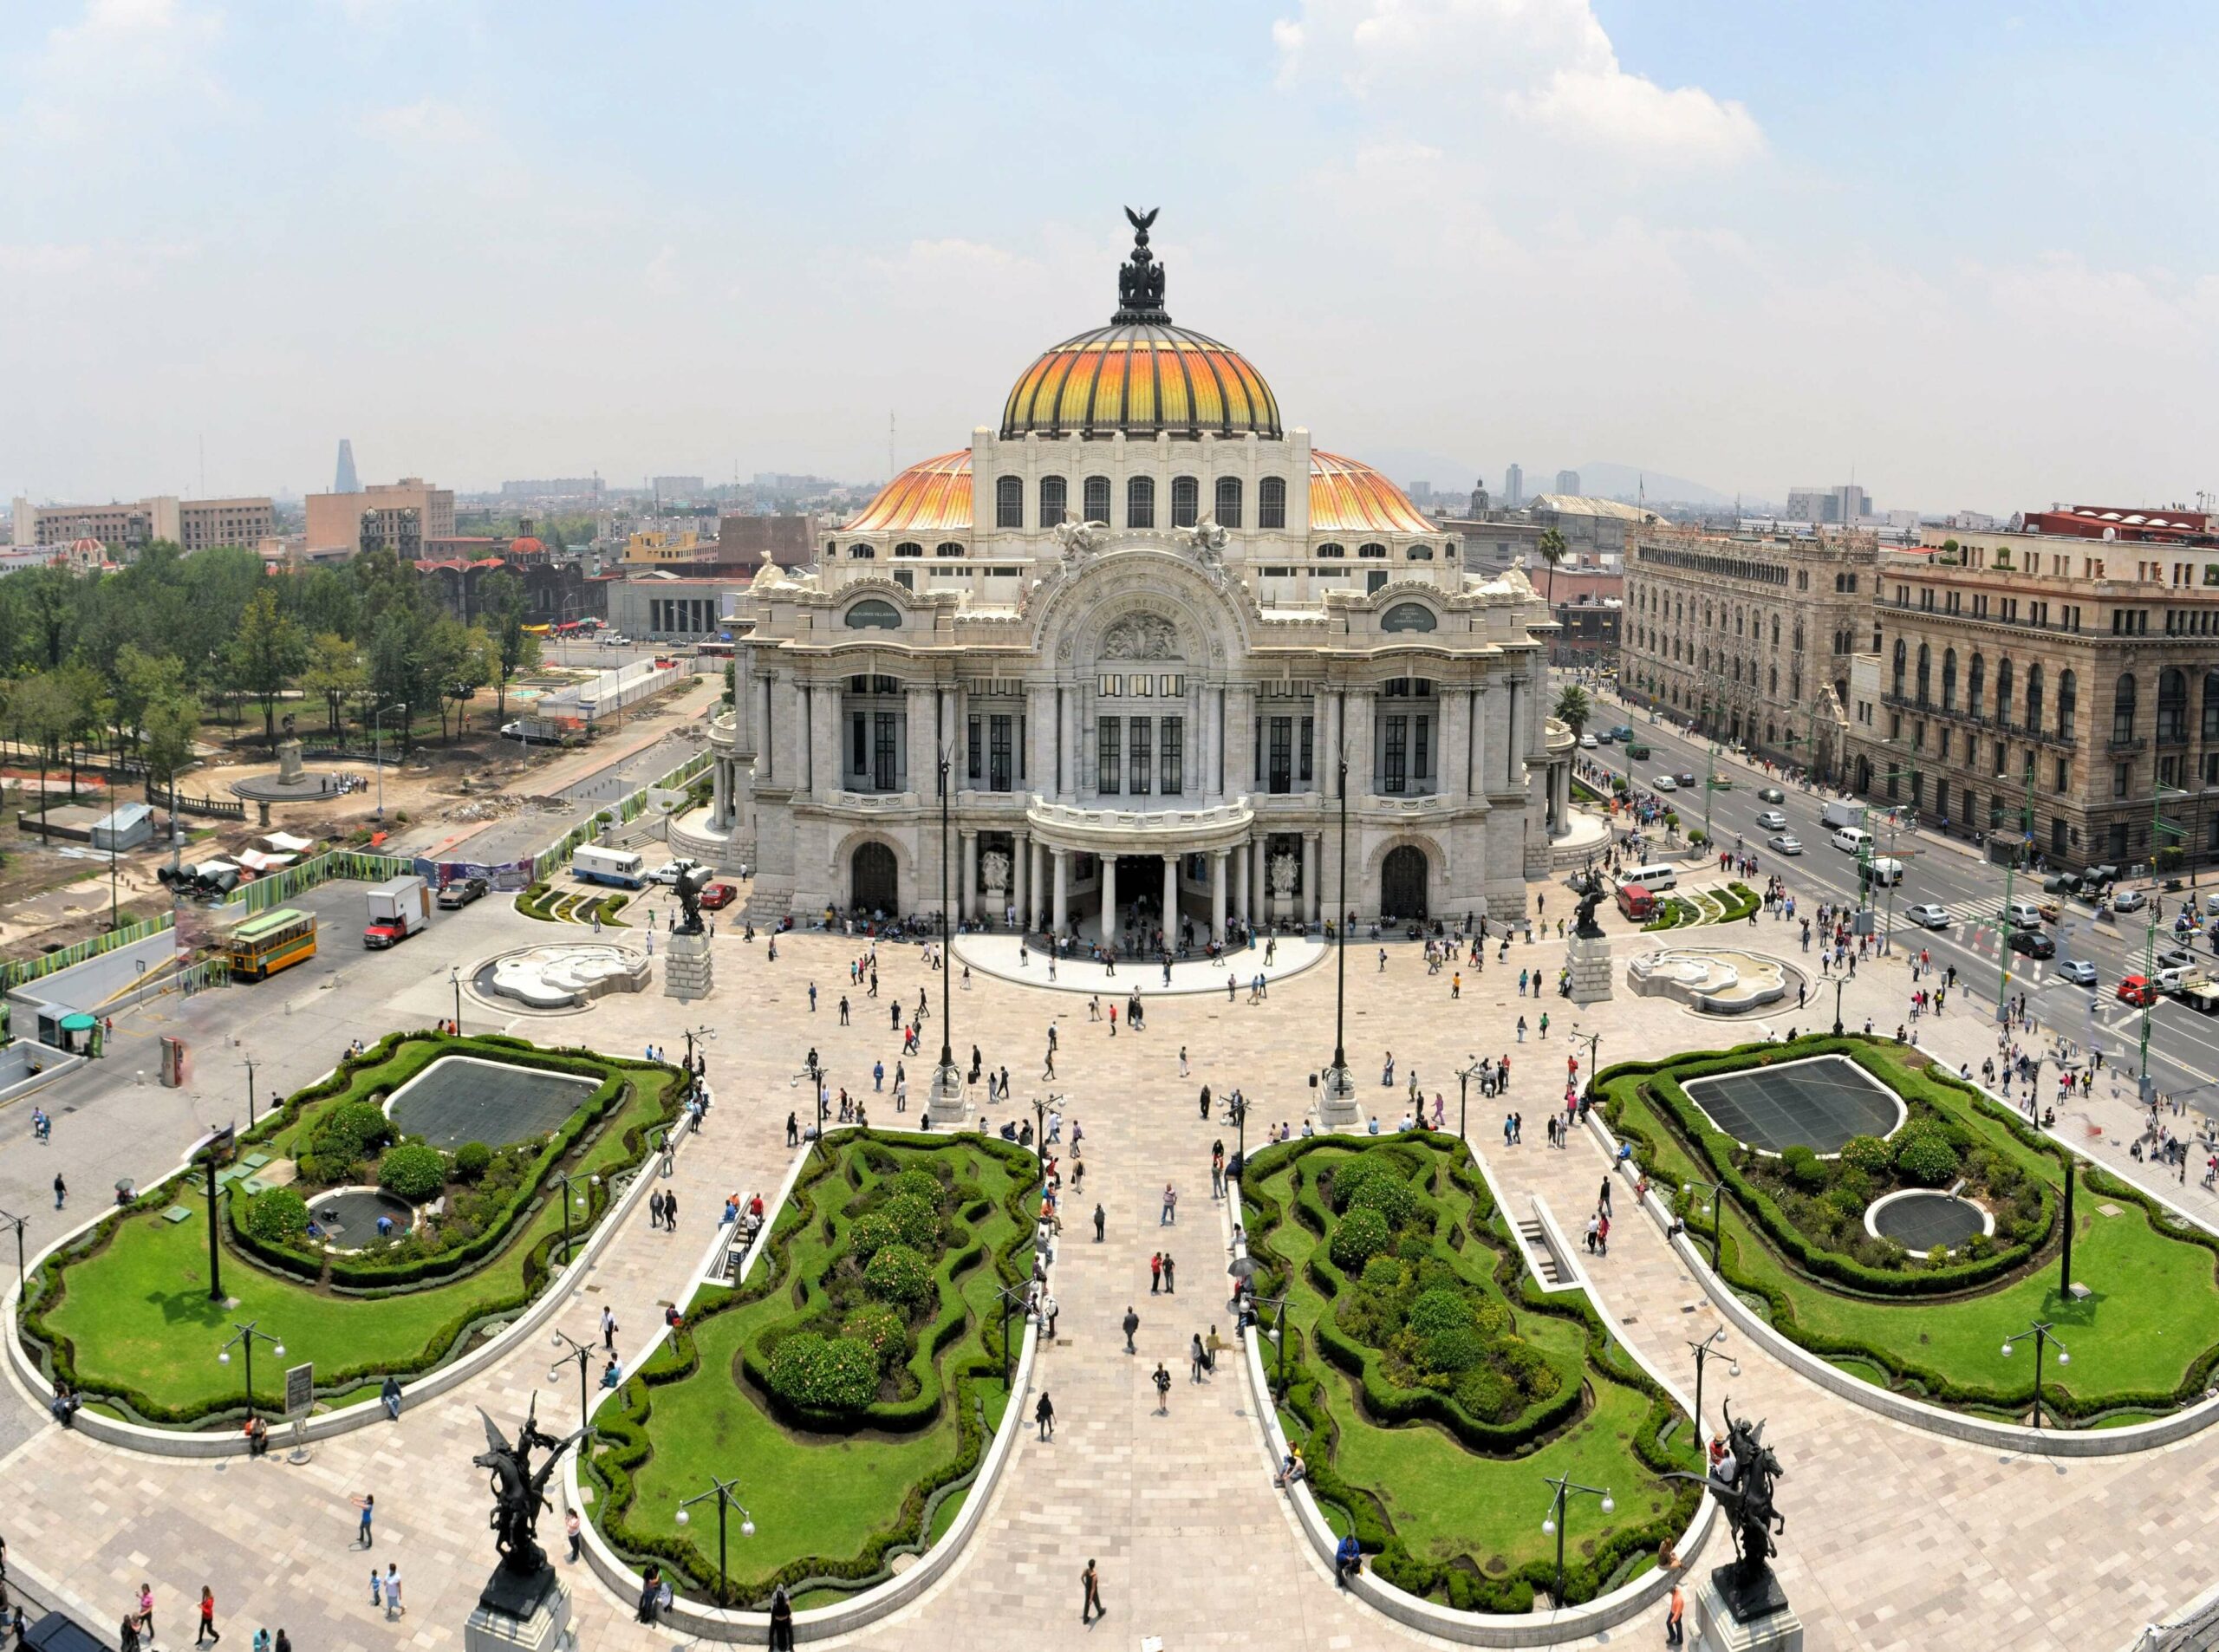 Enjoy an aerial view of the plaza in Mexico City during your vacation.